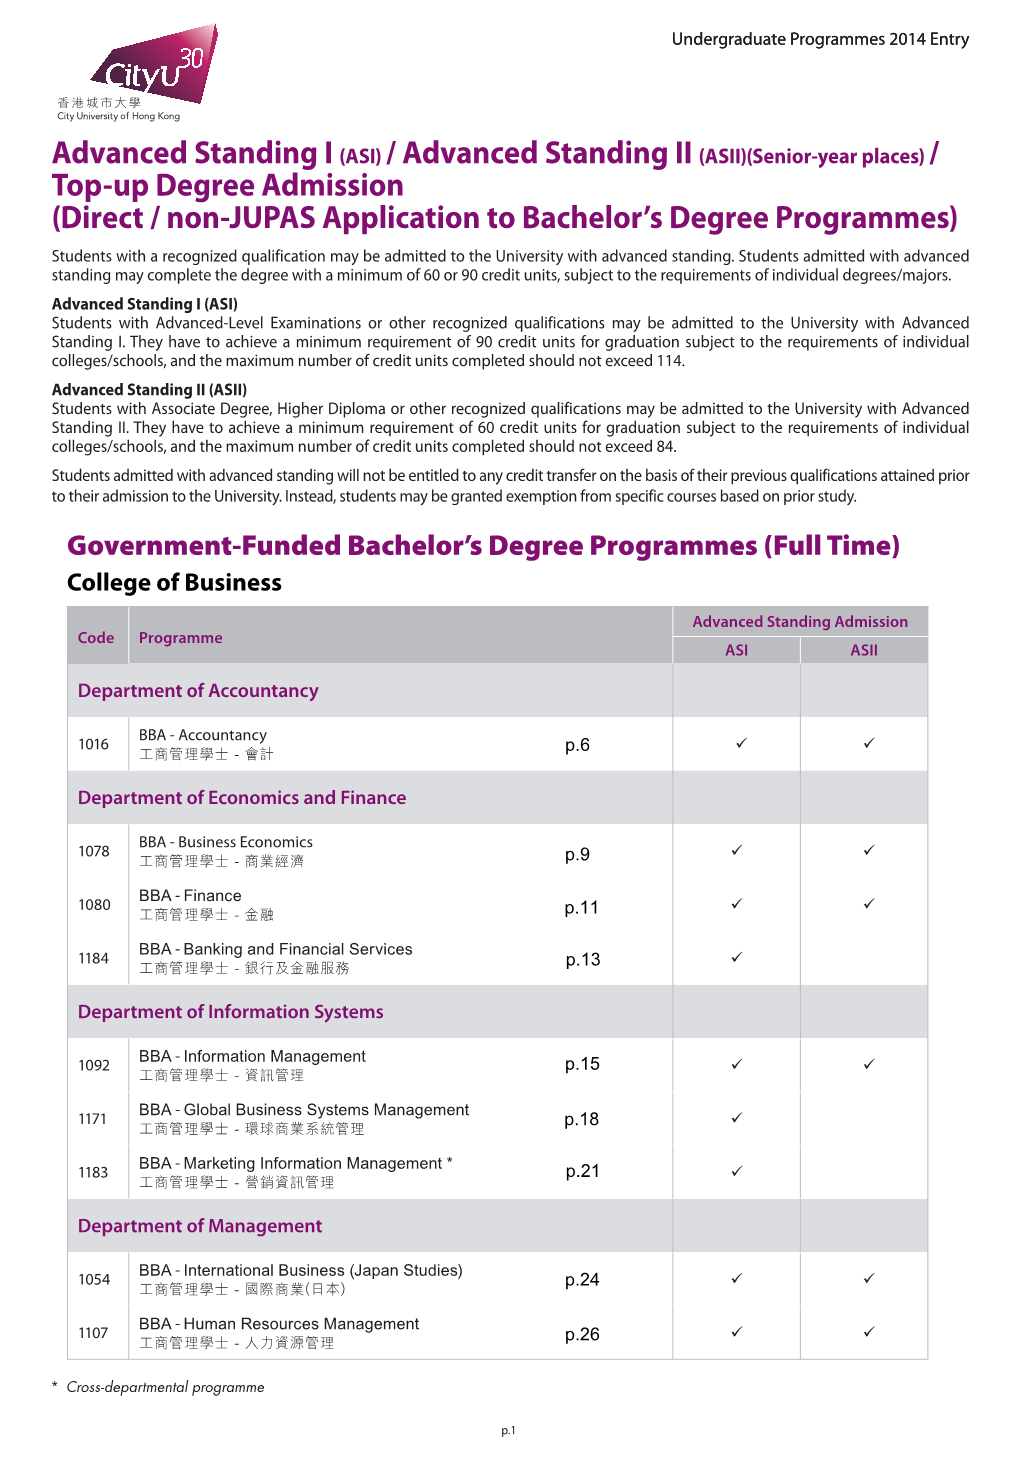 Top-Up Degree Admission (Direct / Non-JUPAS Application to Bachelor's Degree Programmes)